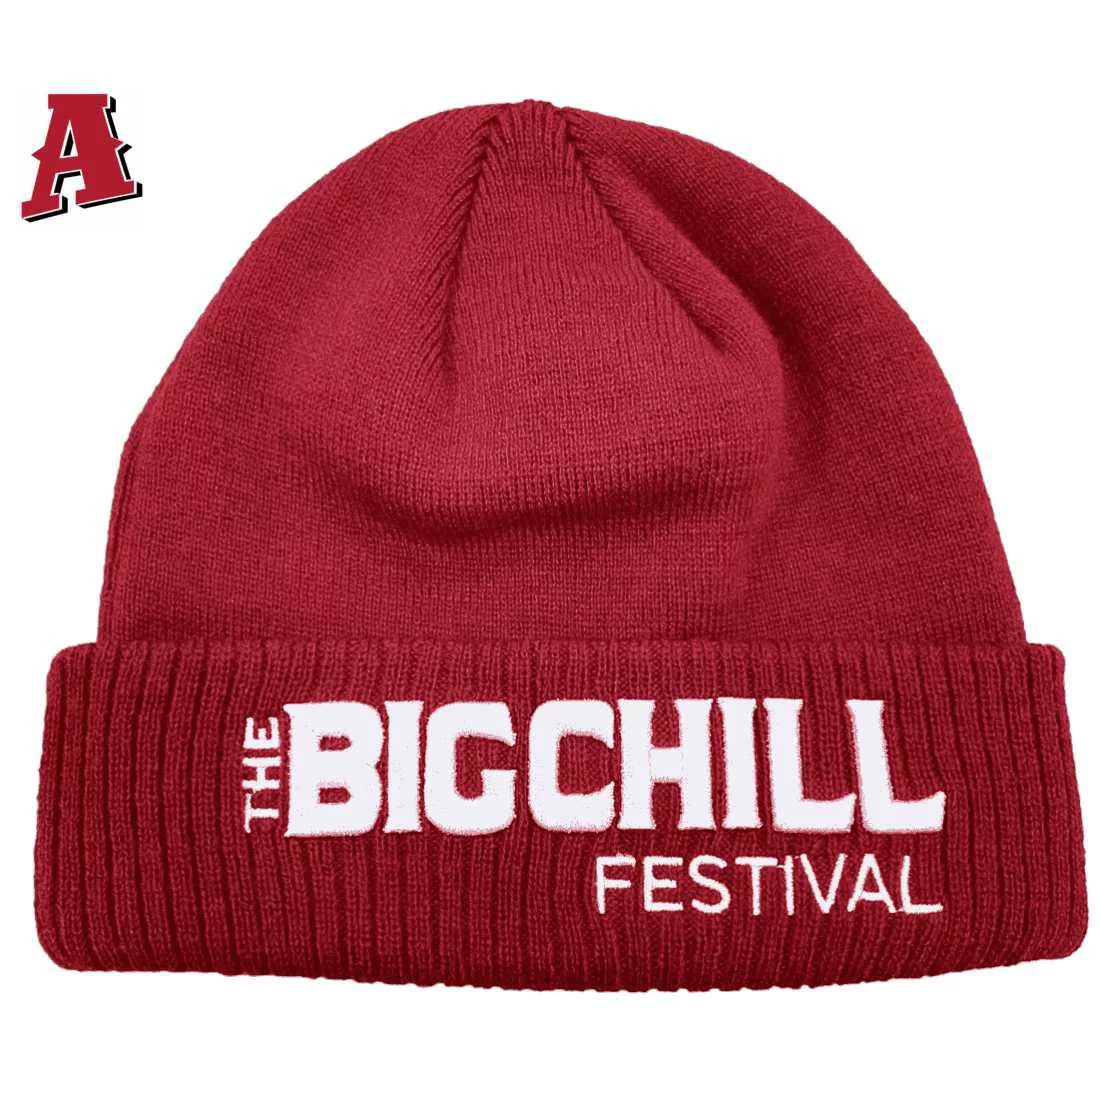 The Big Chill Festival Civic Park Armidale NSW Aussie Beanie One Size Fits All Acrylic with Optional Ribbed Cuff - No Pom -Red